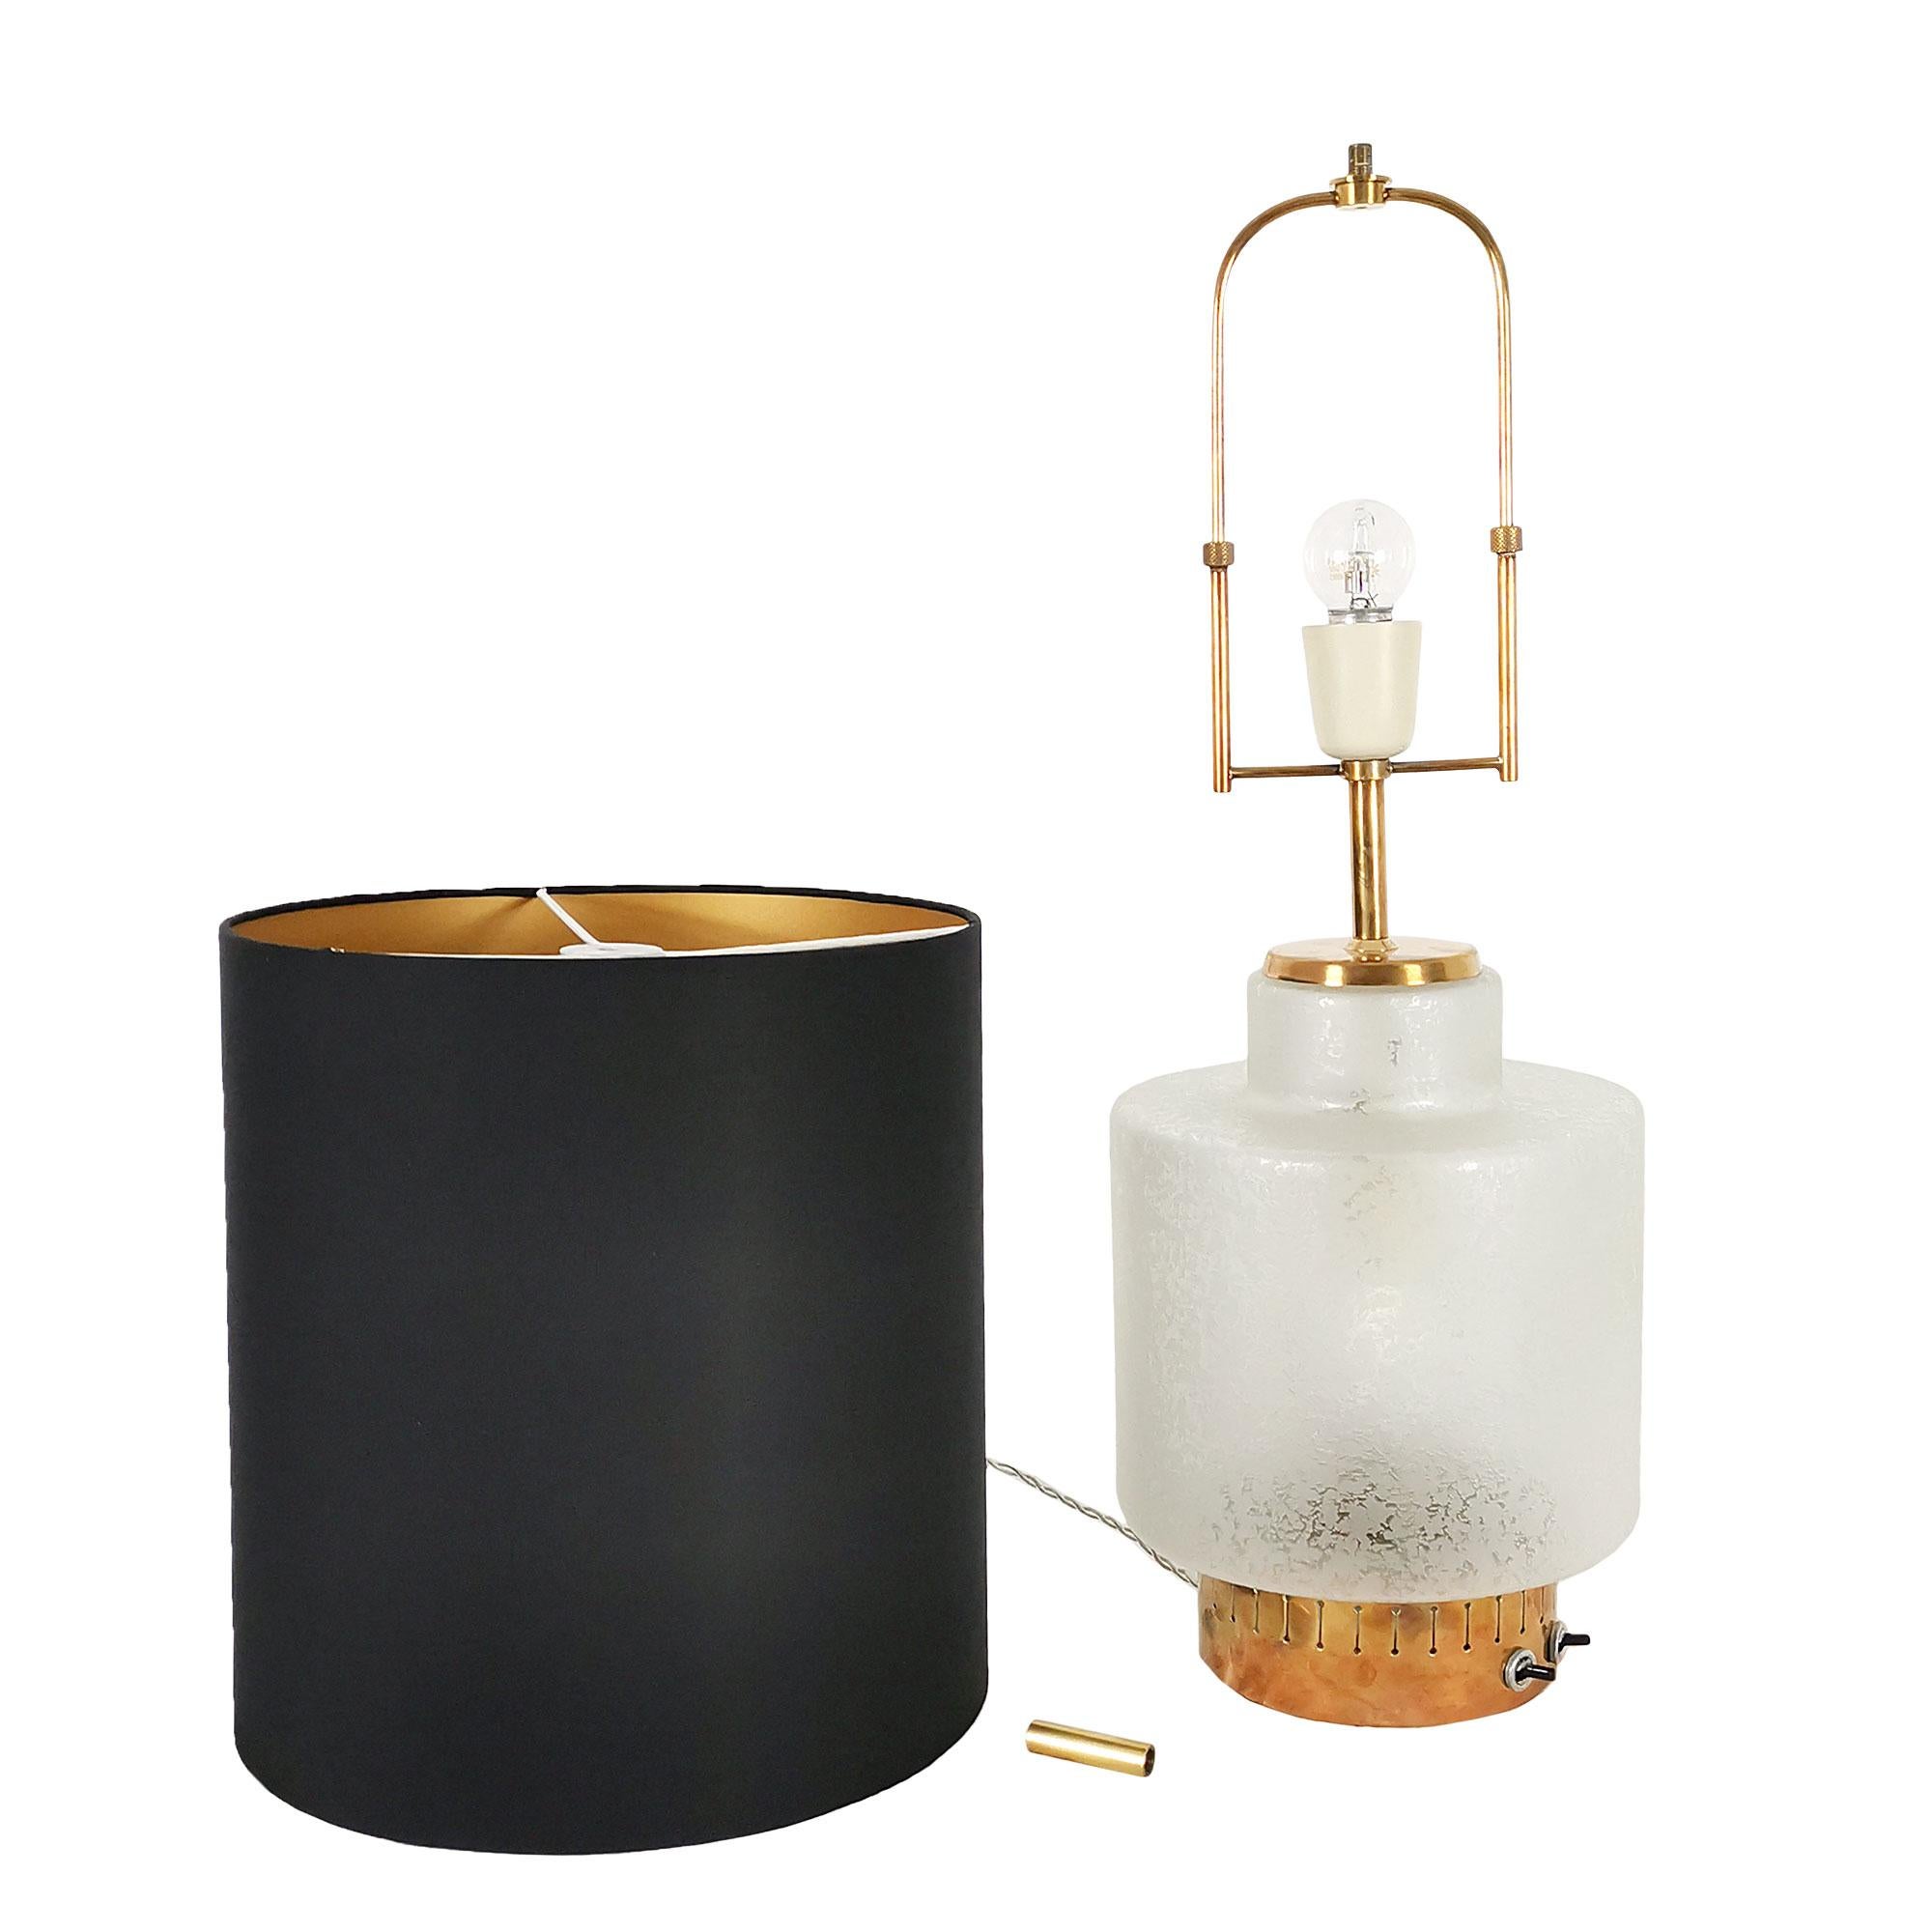 Italian Mid-Century Modern Table Lamp by Stilnovo, Brass and Acid Worked Glass - Italy For Sale